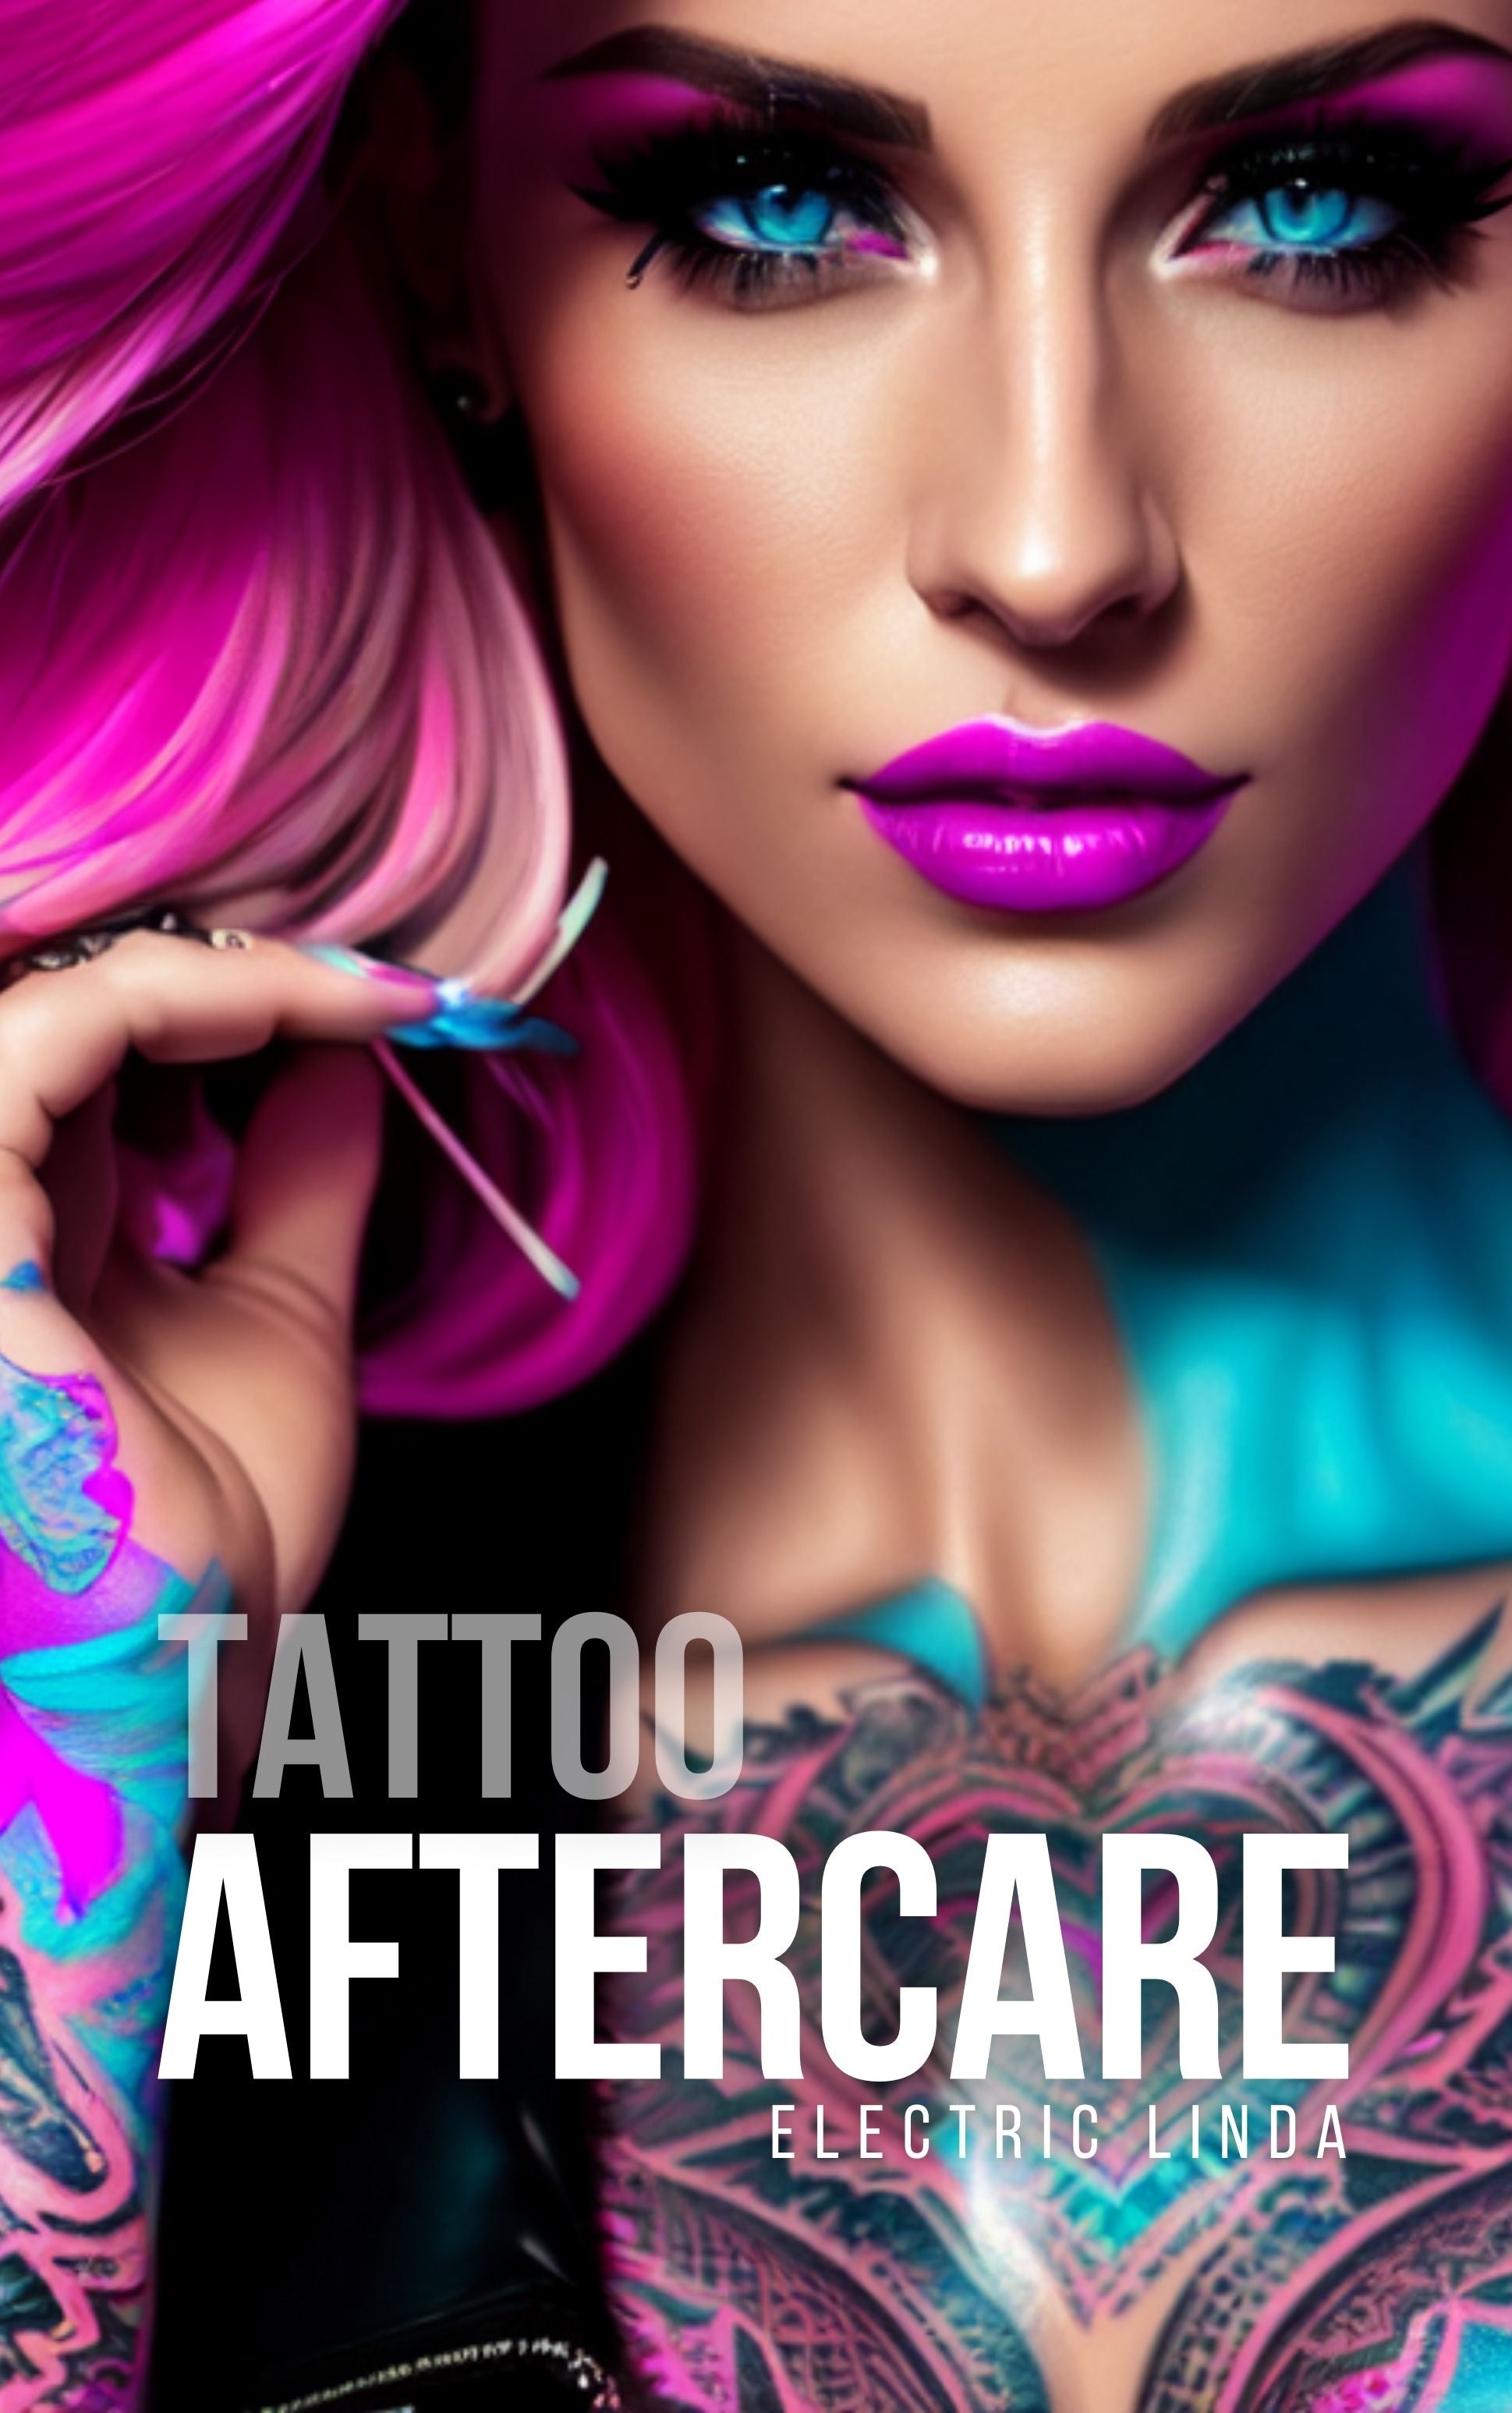 Tattoo Aftercare Guide - Electric Linda